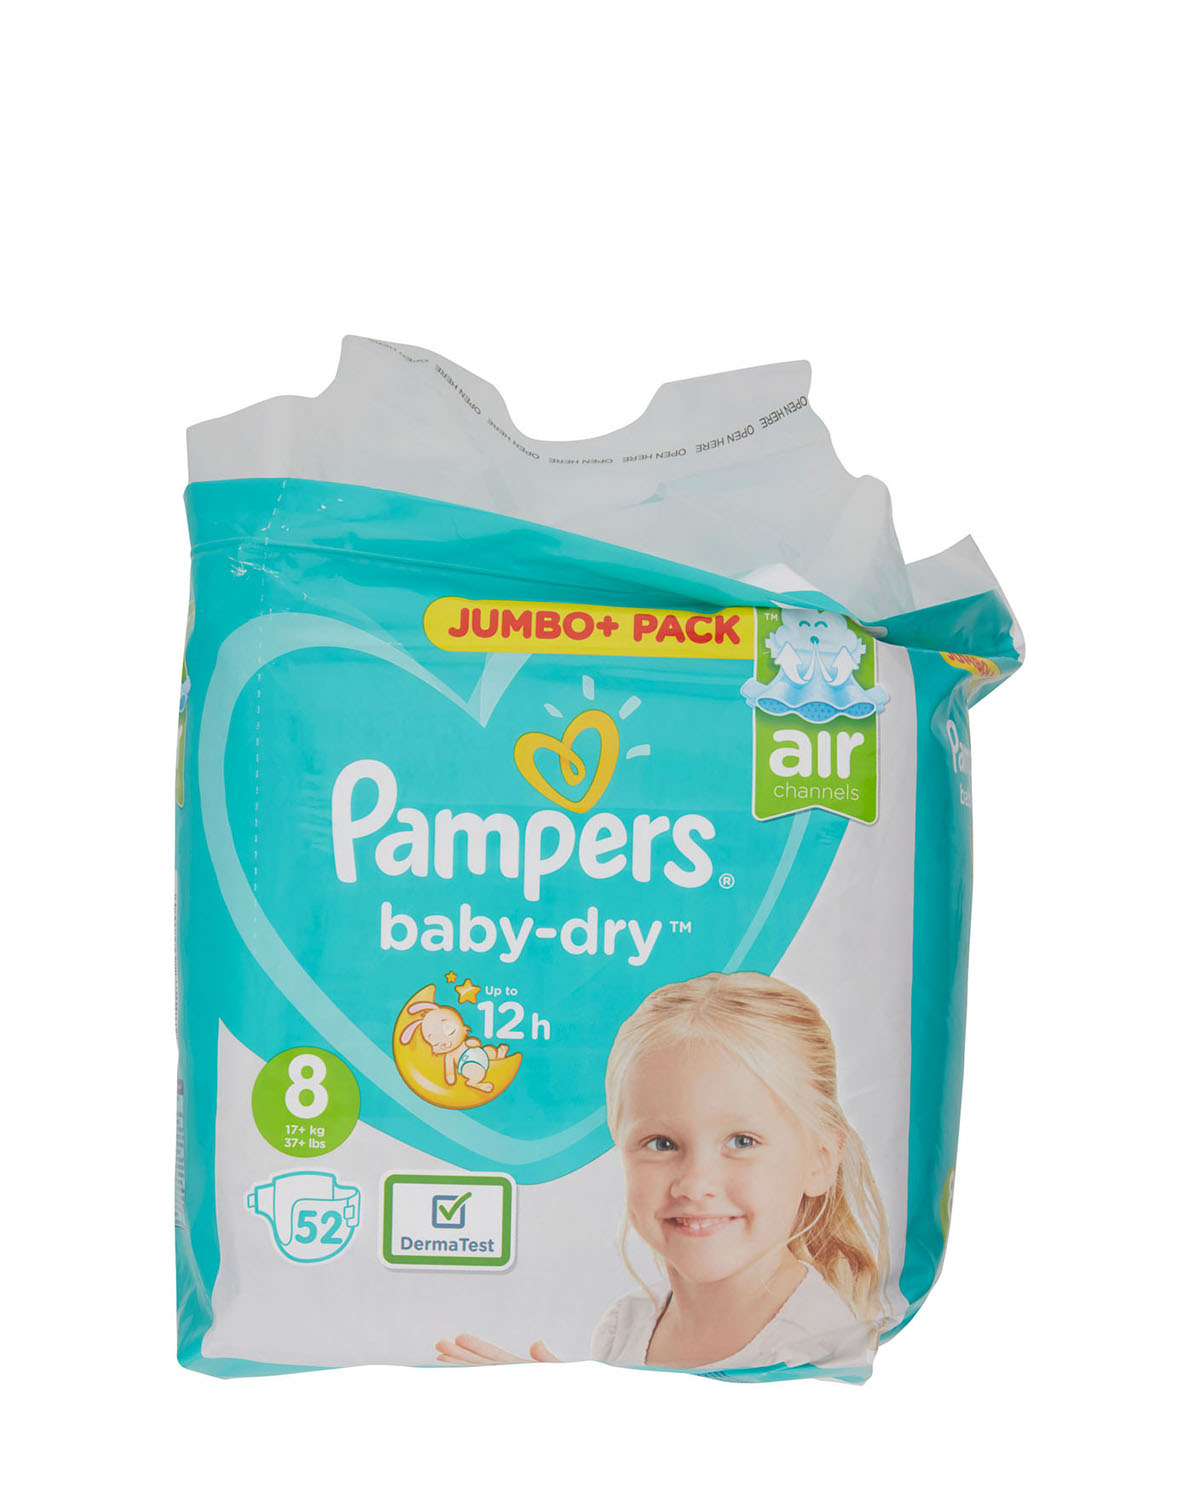 Pampers Baby Dry Size 8 Jumbo Plus - 52 Nappies